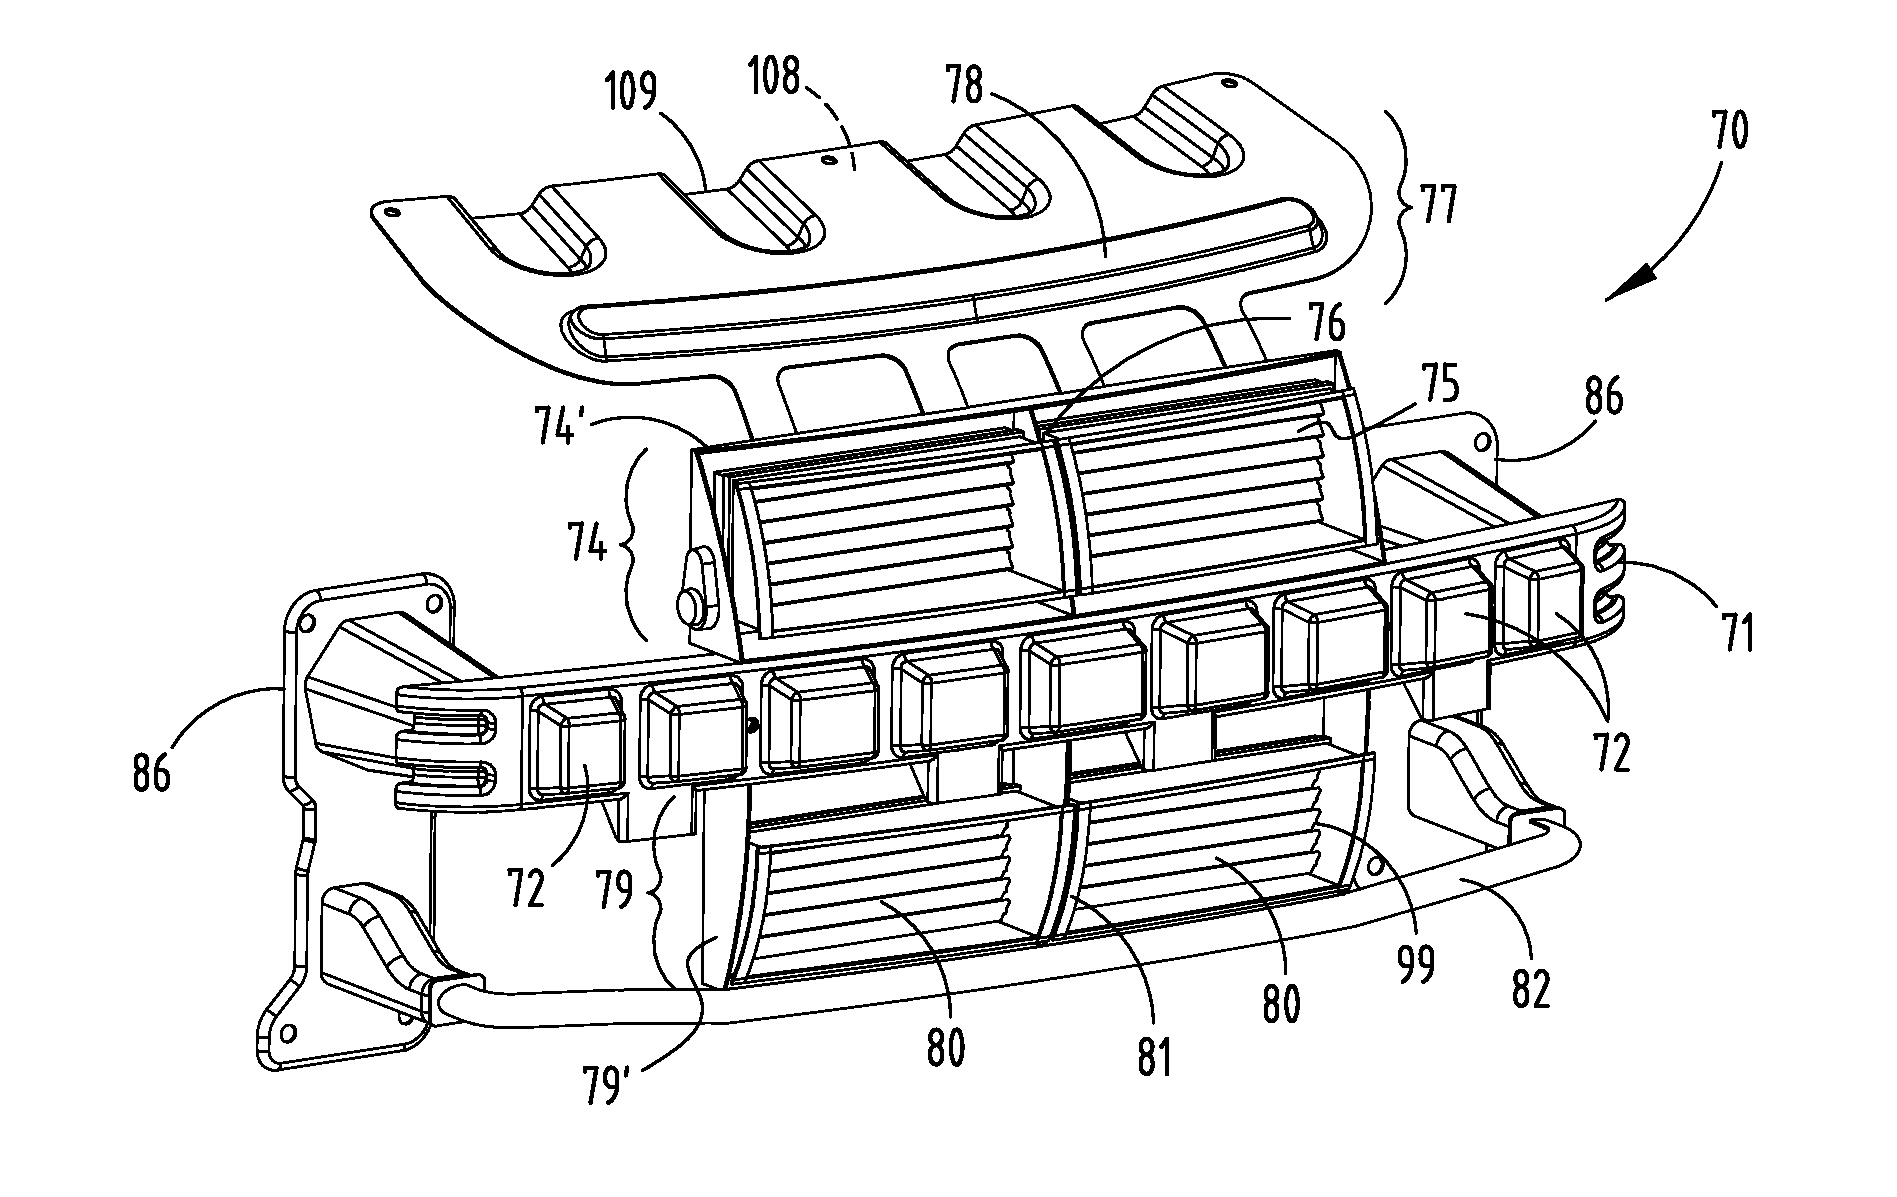 Integrated energy absorber and air flow management structure